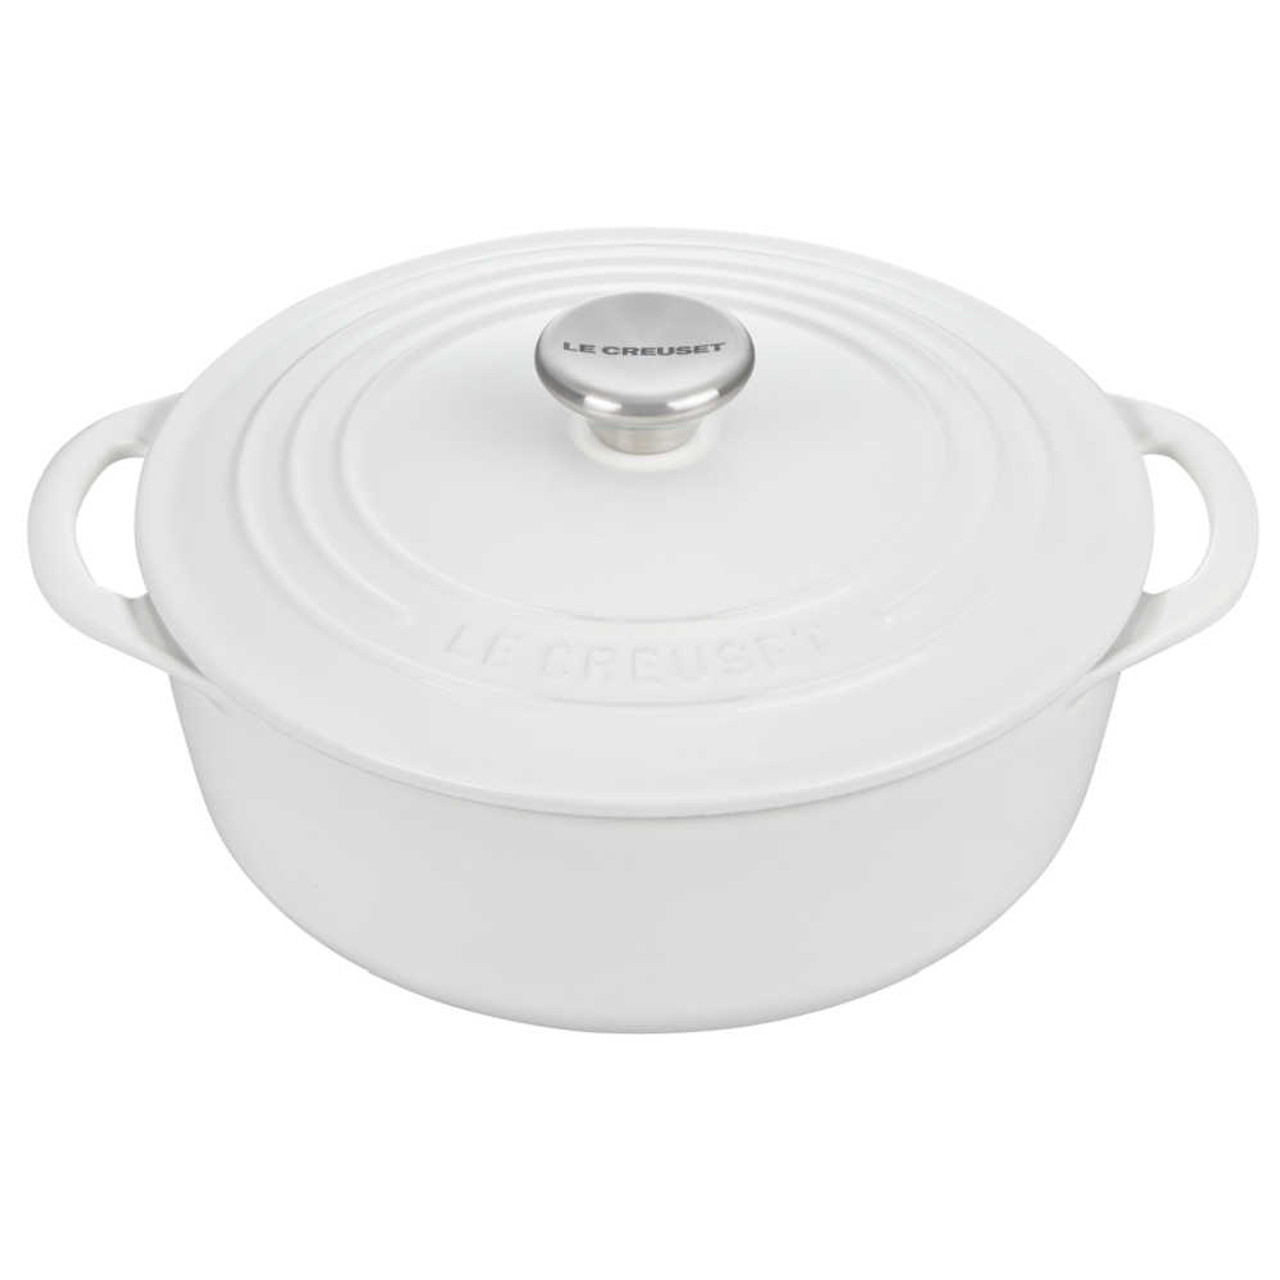 https://cdn11.bigcommerce.com/s-hccytny0od/images/stencil/1280x1280/products/5225/22561/Le_Creuset_Shallow_Round_Dutch_Oven_in_White__06921.1674075666.jpg?c=2?imbypass=on